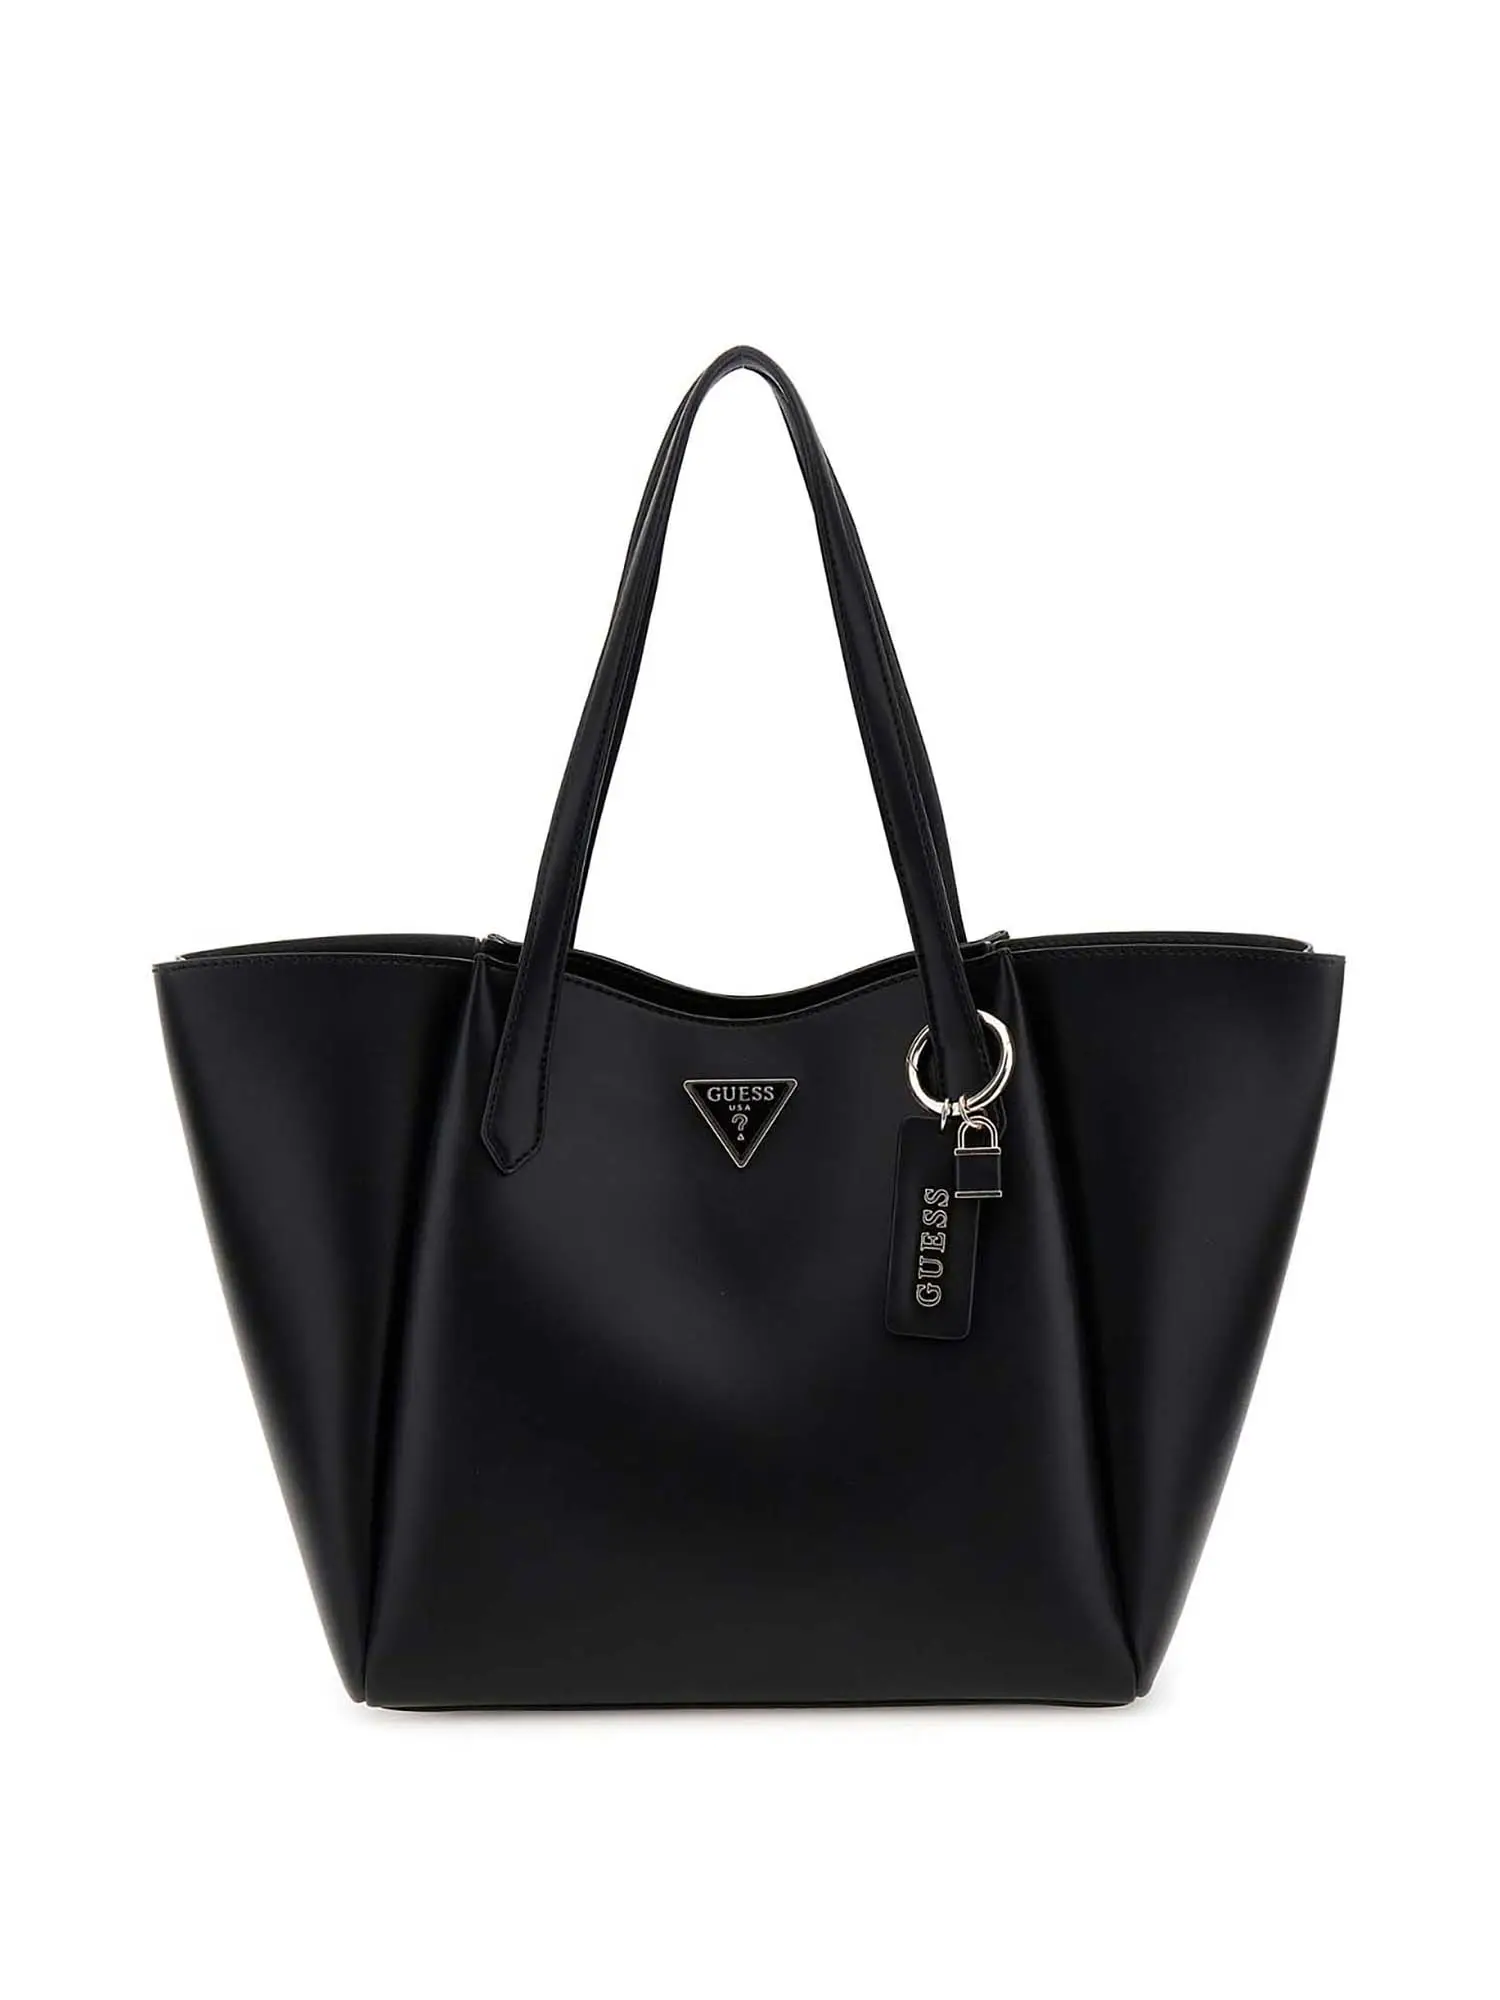 TOTE DONNA - GUESS - HWVG93 09230 - NERO, UNICA